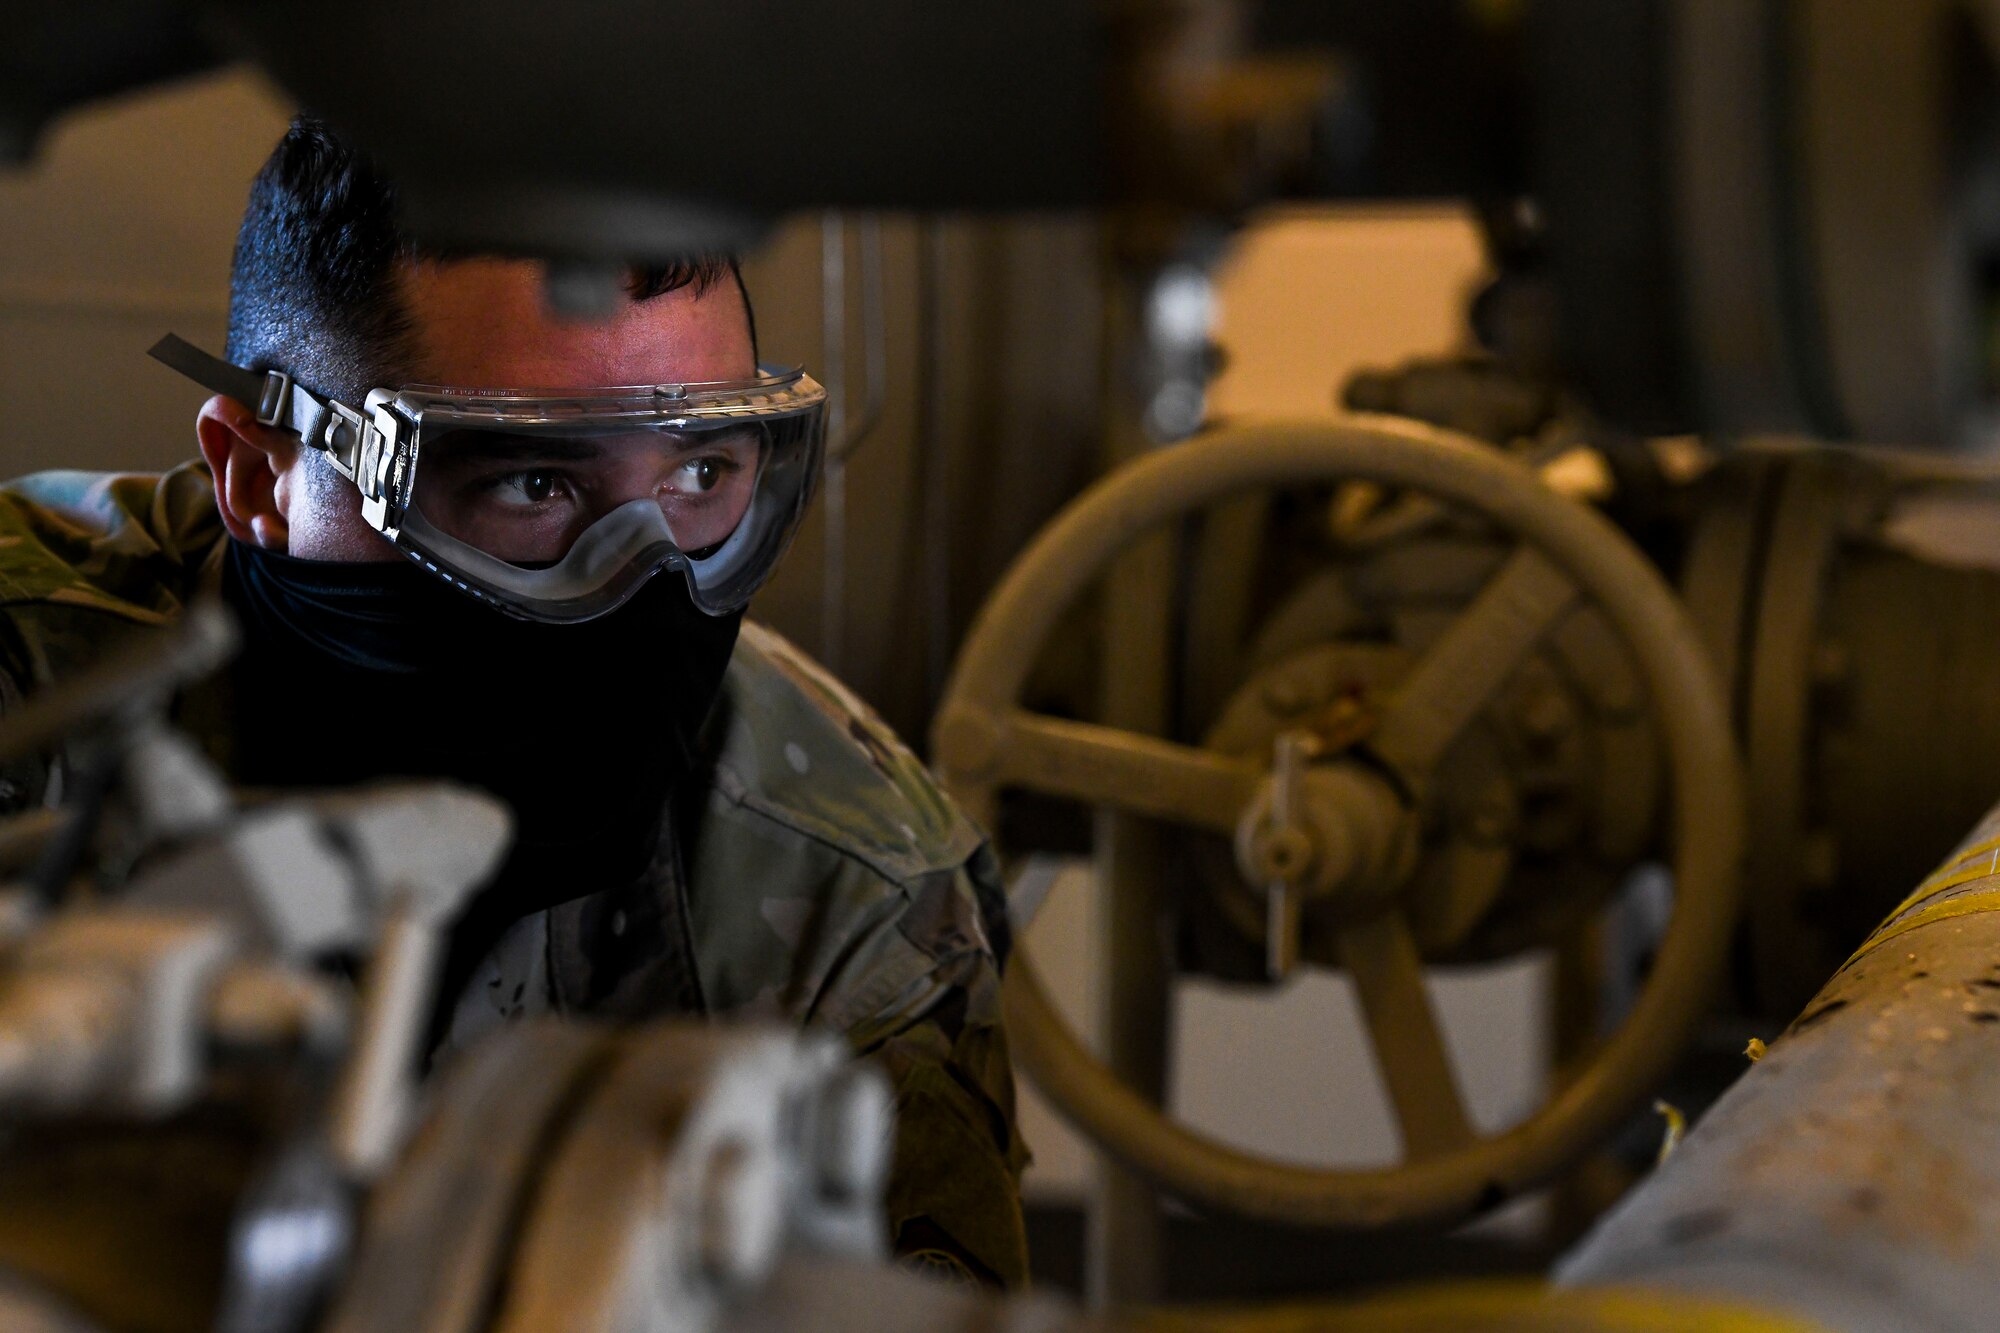 Airman 1st Class Carlos Cruz-Vasquez, 436th Logistics Readiness Squadron fuels laboratory technician, collects a fuel sample for testing at Dover Air Force Base, Delaware, Jan. 12, 2021. Fuel is inspected daily to ensure all aircraft receive the cleanest fuel possible, enabling them to effectively execute Team Dover’s global airlift mission. (U.S. Air Force photo by Airman 1st Class Stephani Barge)